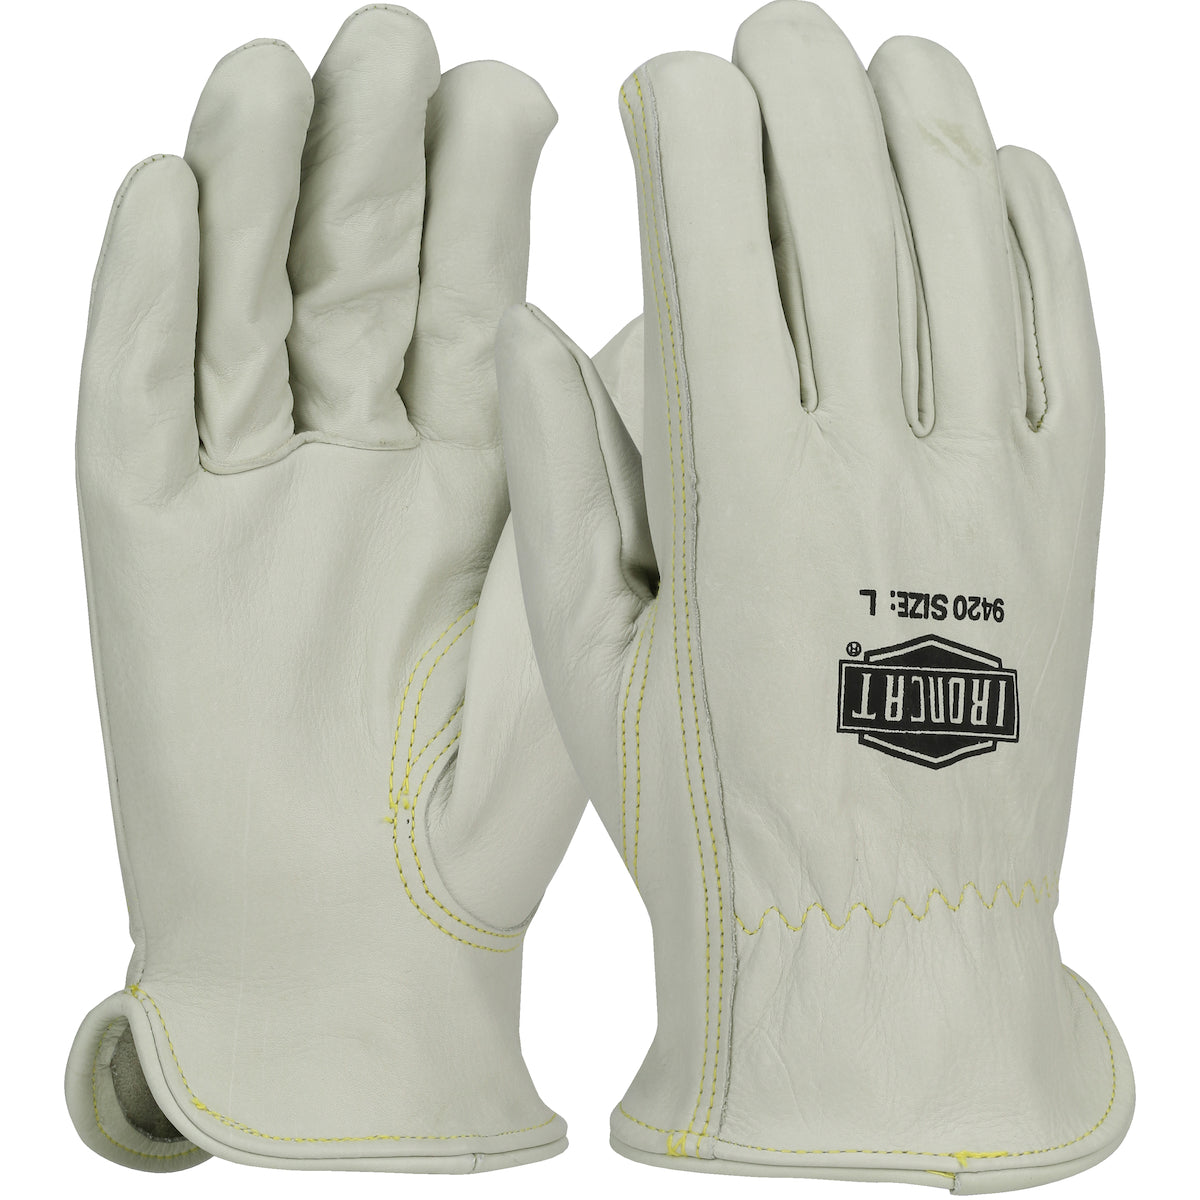 West Chester 9420/S Premium Grade Top Grain Cowhide Leather Drivers Glove - Keystone Thumb